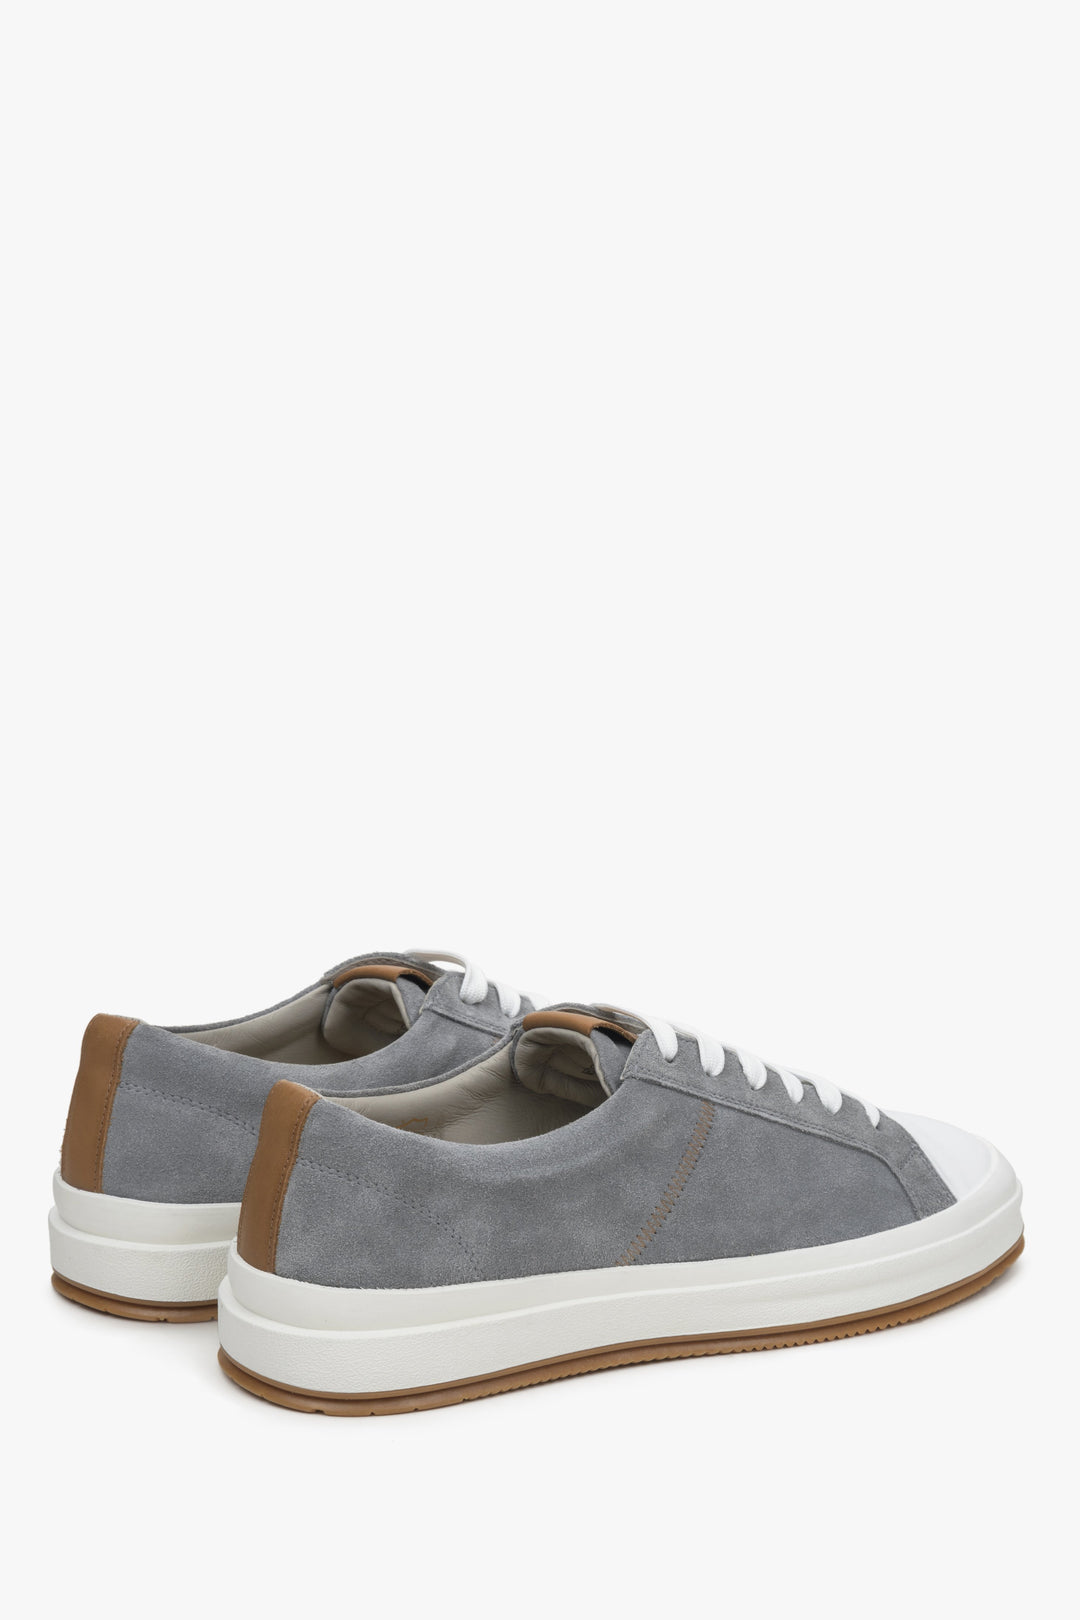 Men's grey sneakers made of genuine velour - close-up on the heel and side line of the shoes.